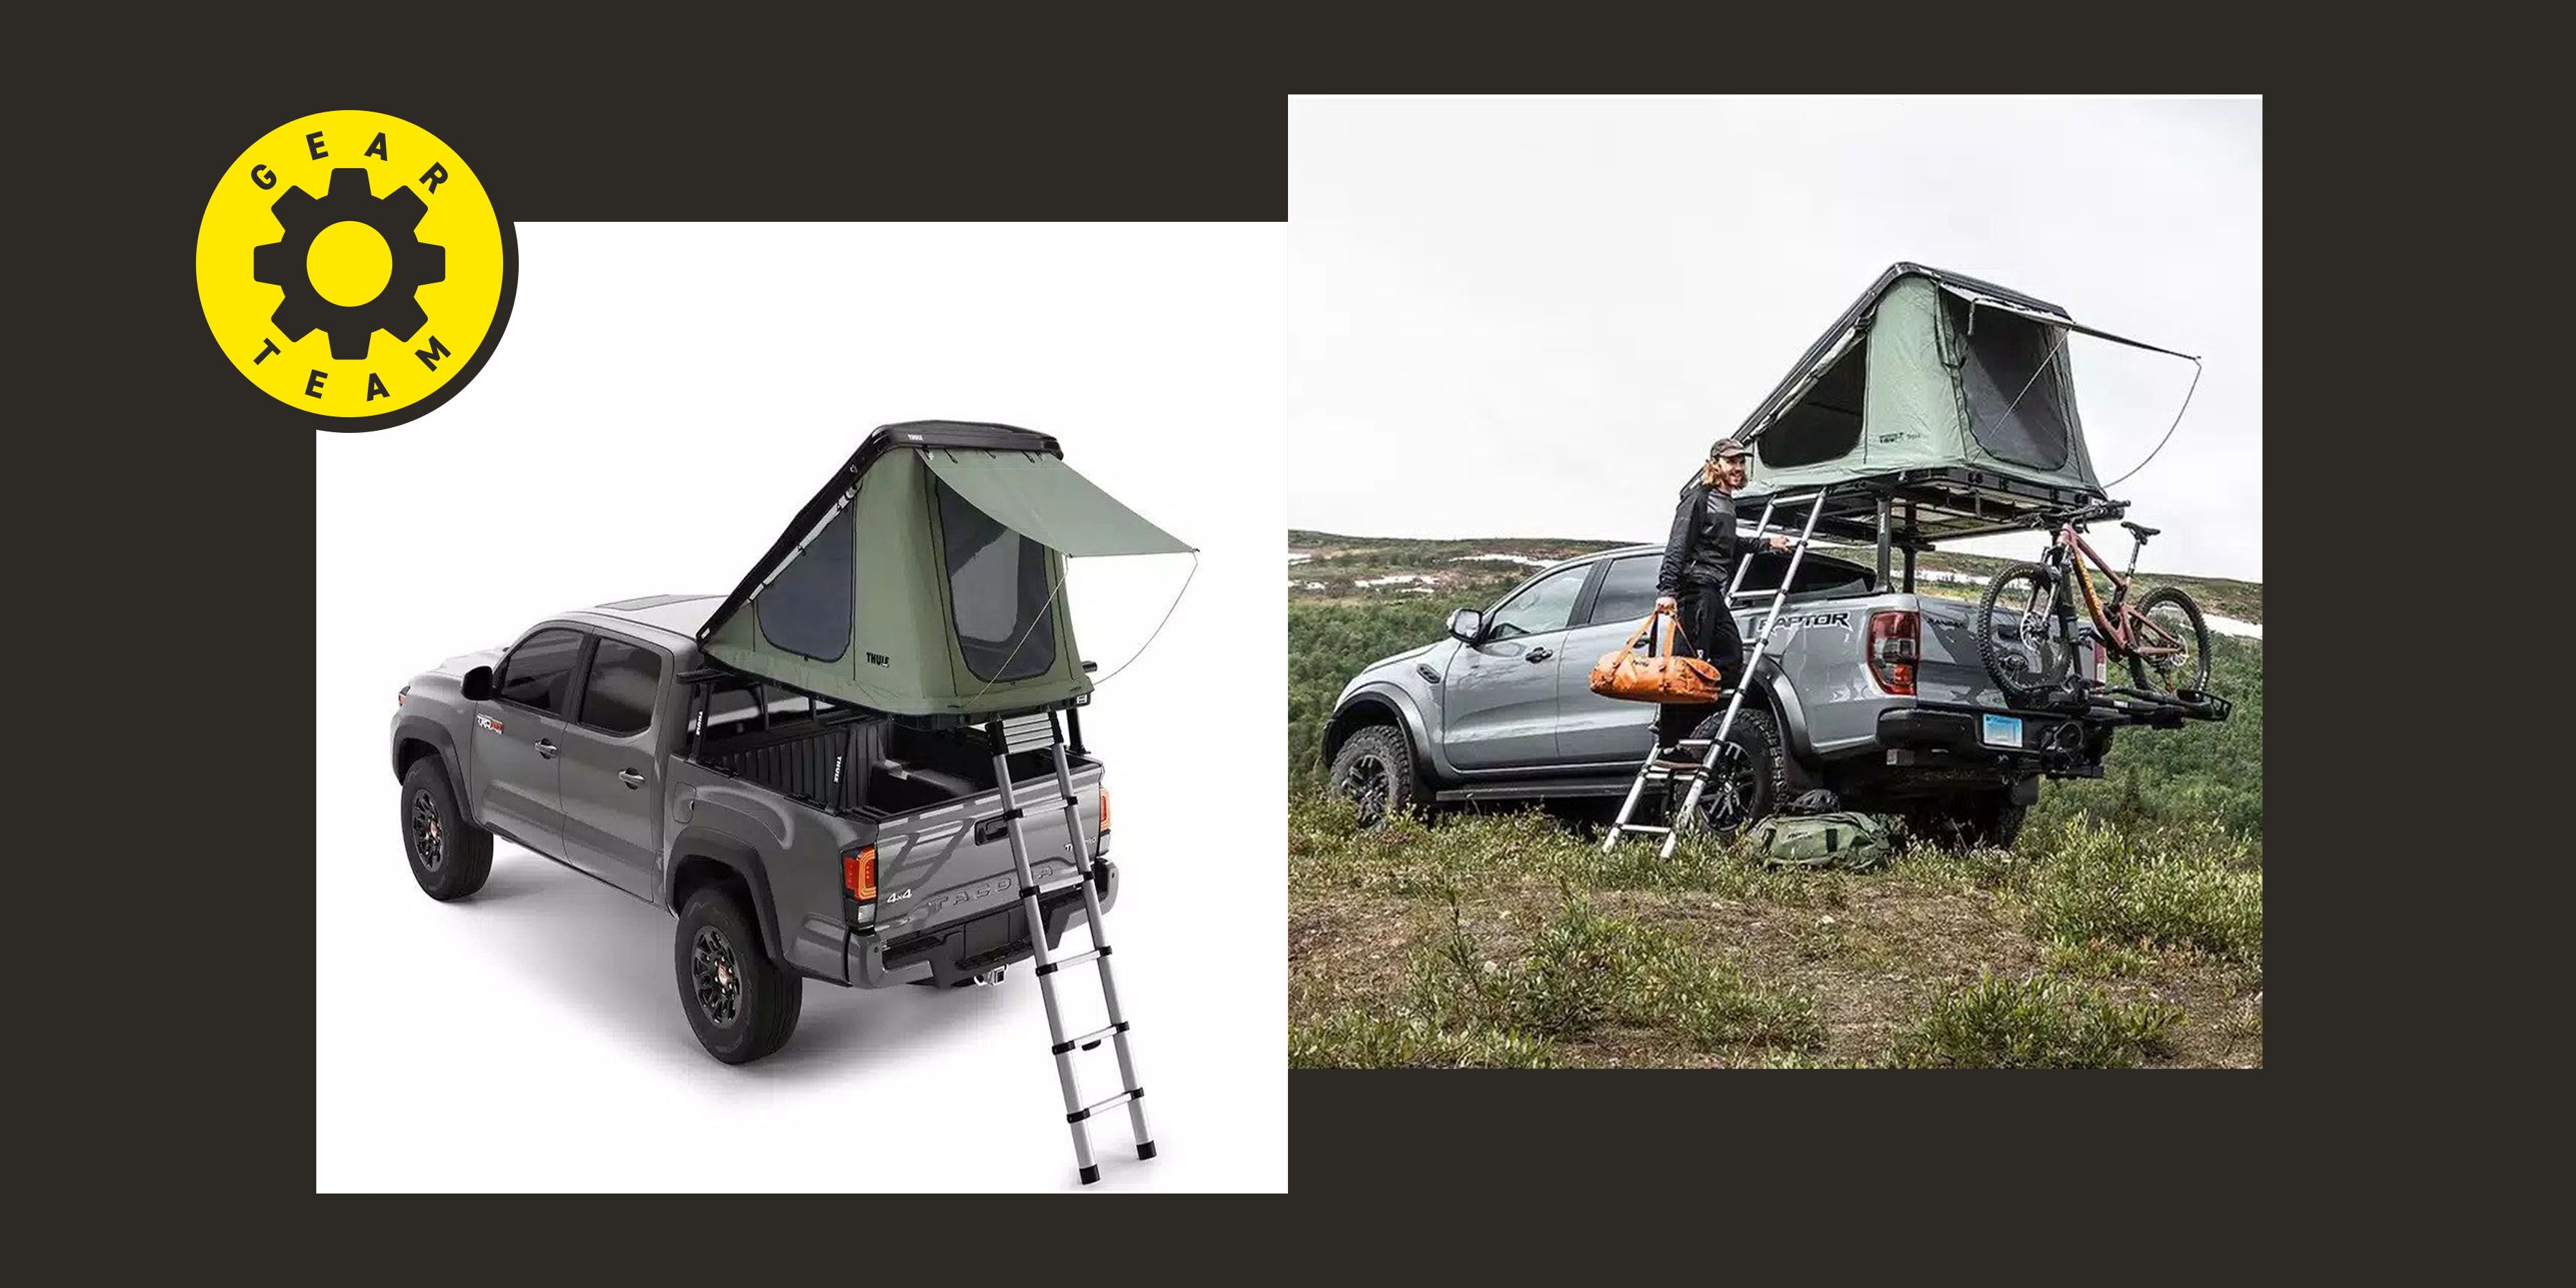 Rooftop tent recommendations for small cars : r/camping